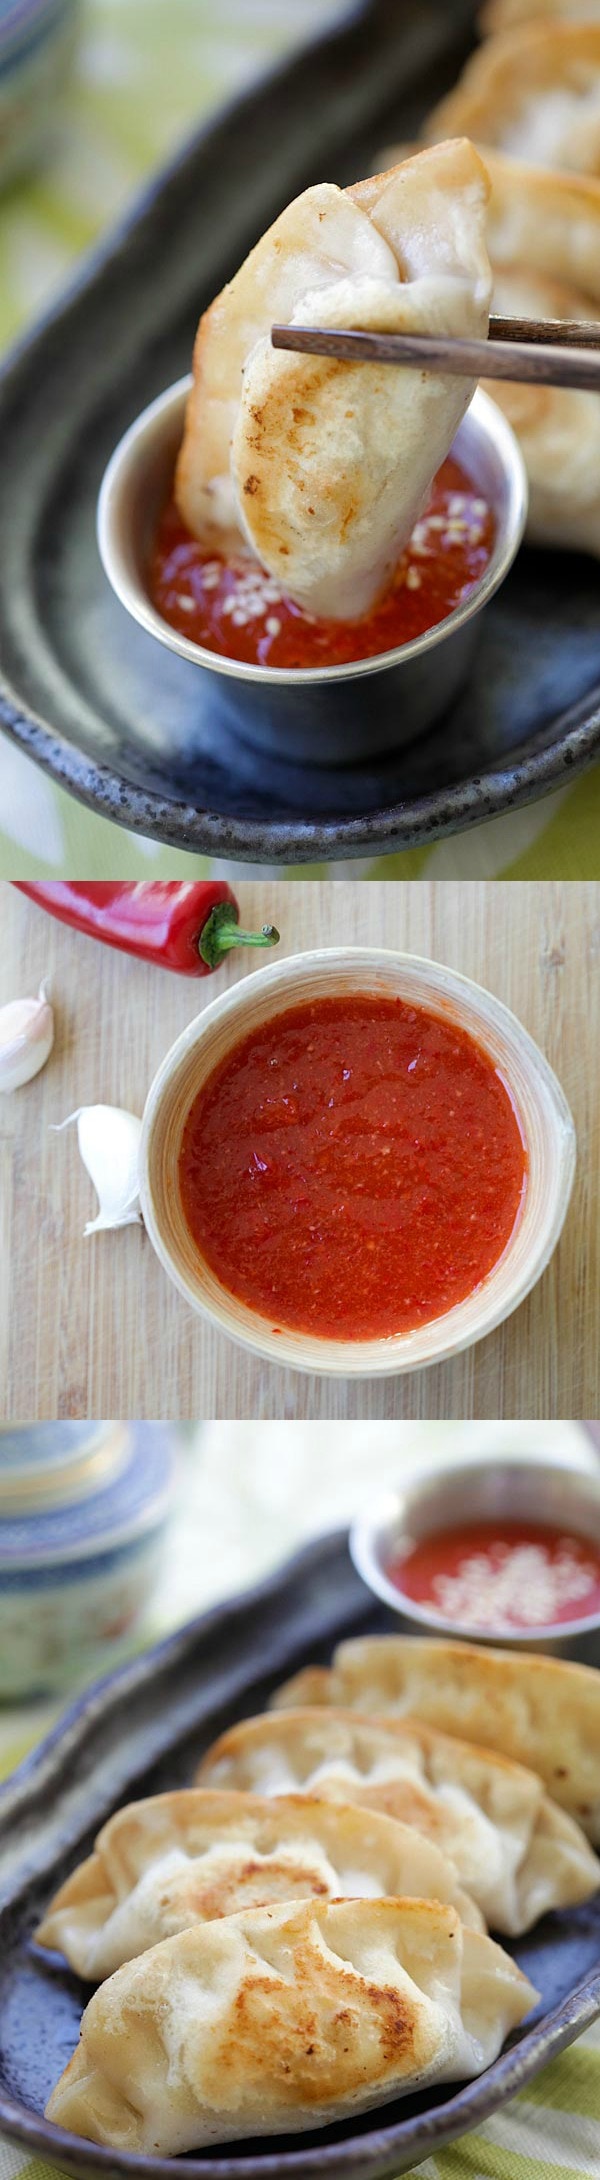 Homemade Sweet Chili Sauce – easy recipe that is much better than store-bought bottled sweet chili sauce, fresh, spicy and easy to make | rasamalaysia.com